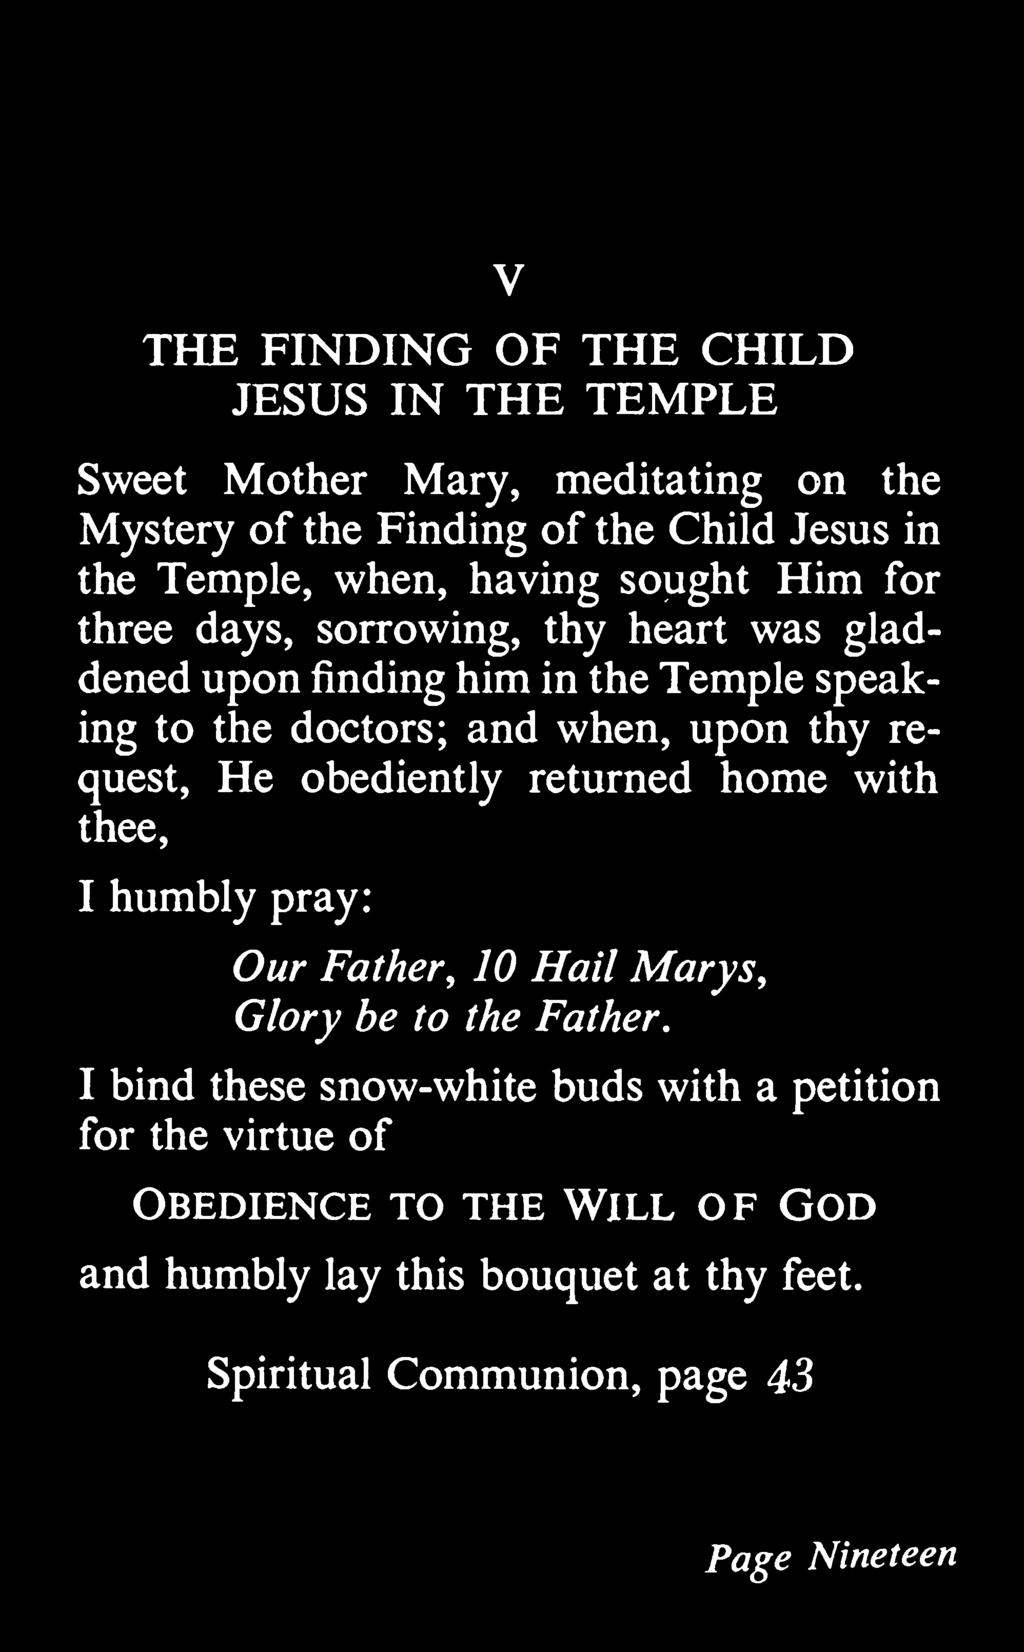 V THE FINDING OF THE CHILD JESUS IN THE TEMPLE Sweet Mother Mary, meditating on the Mystery of the Finding of the Child Jesus in the Temple, when, having sought Him for three days, sorrowing, thy